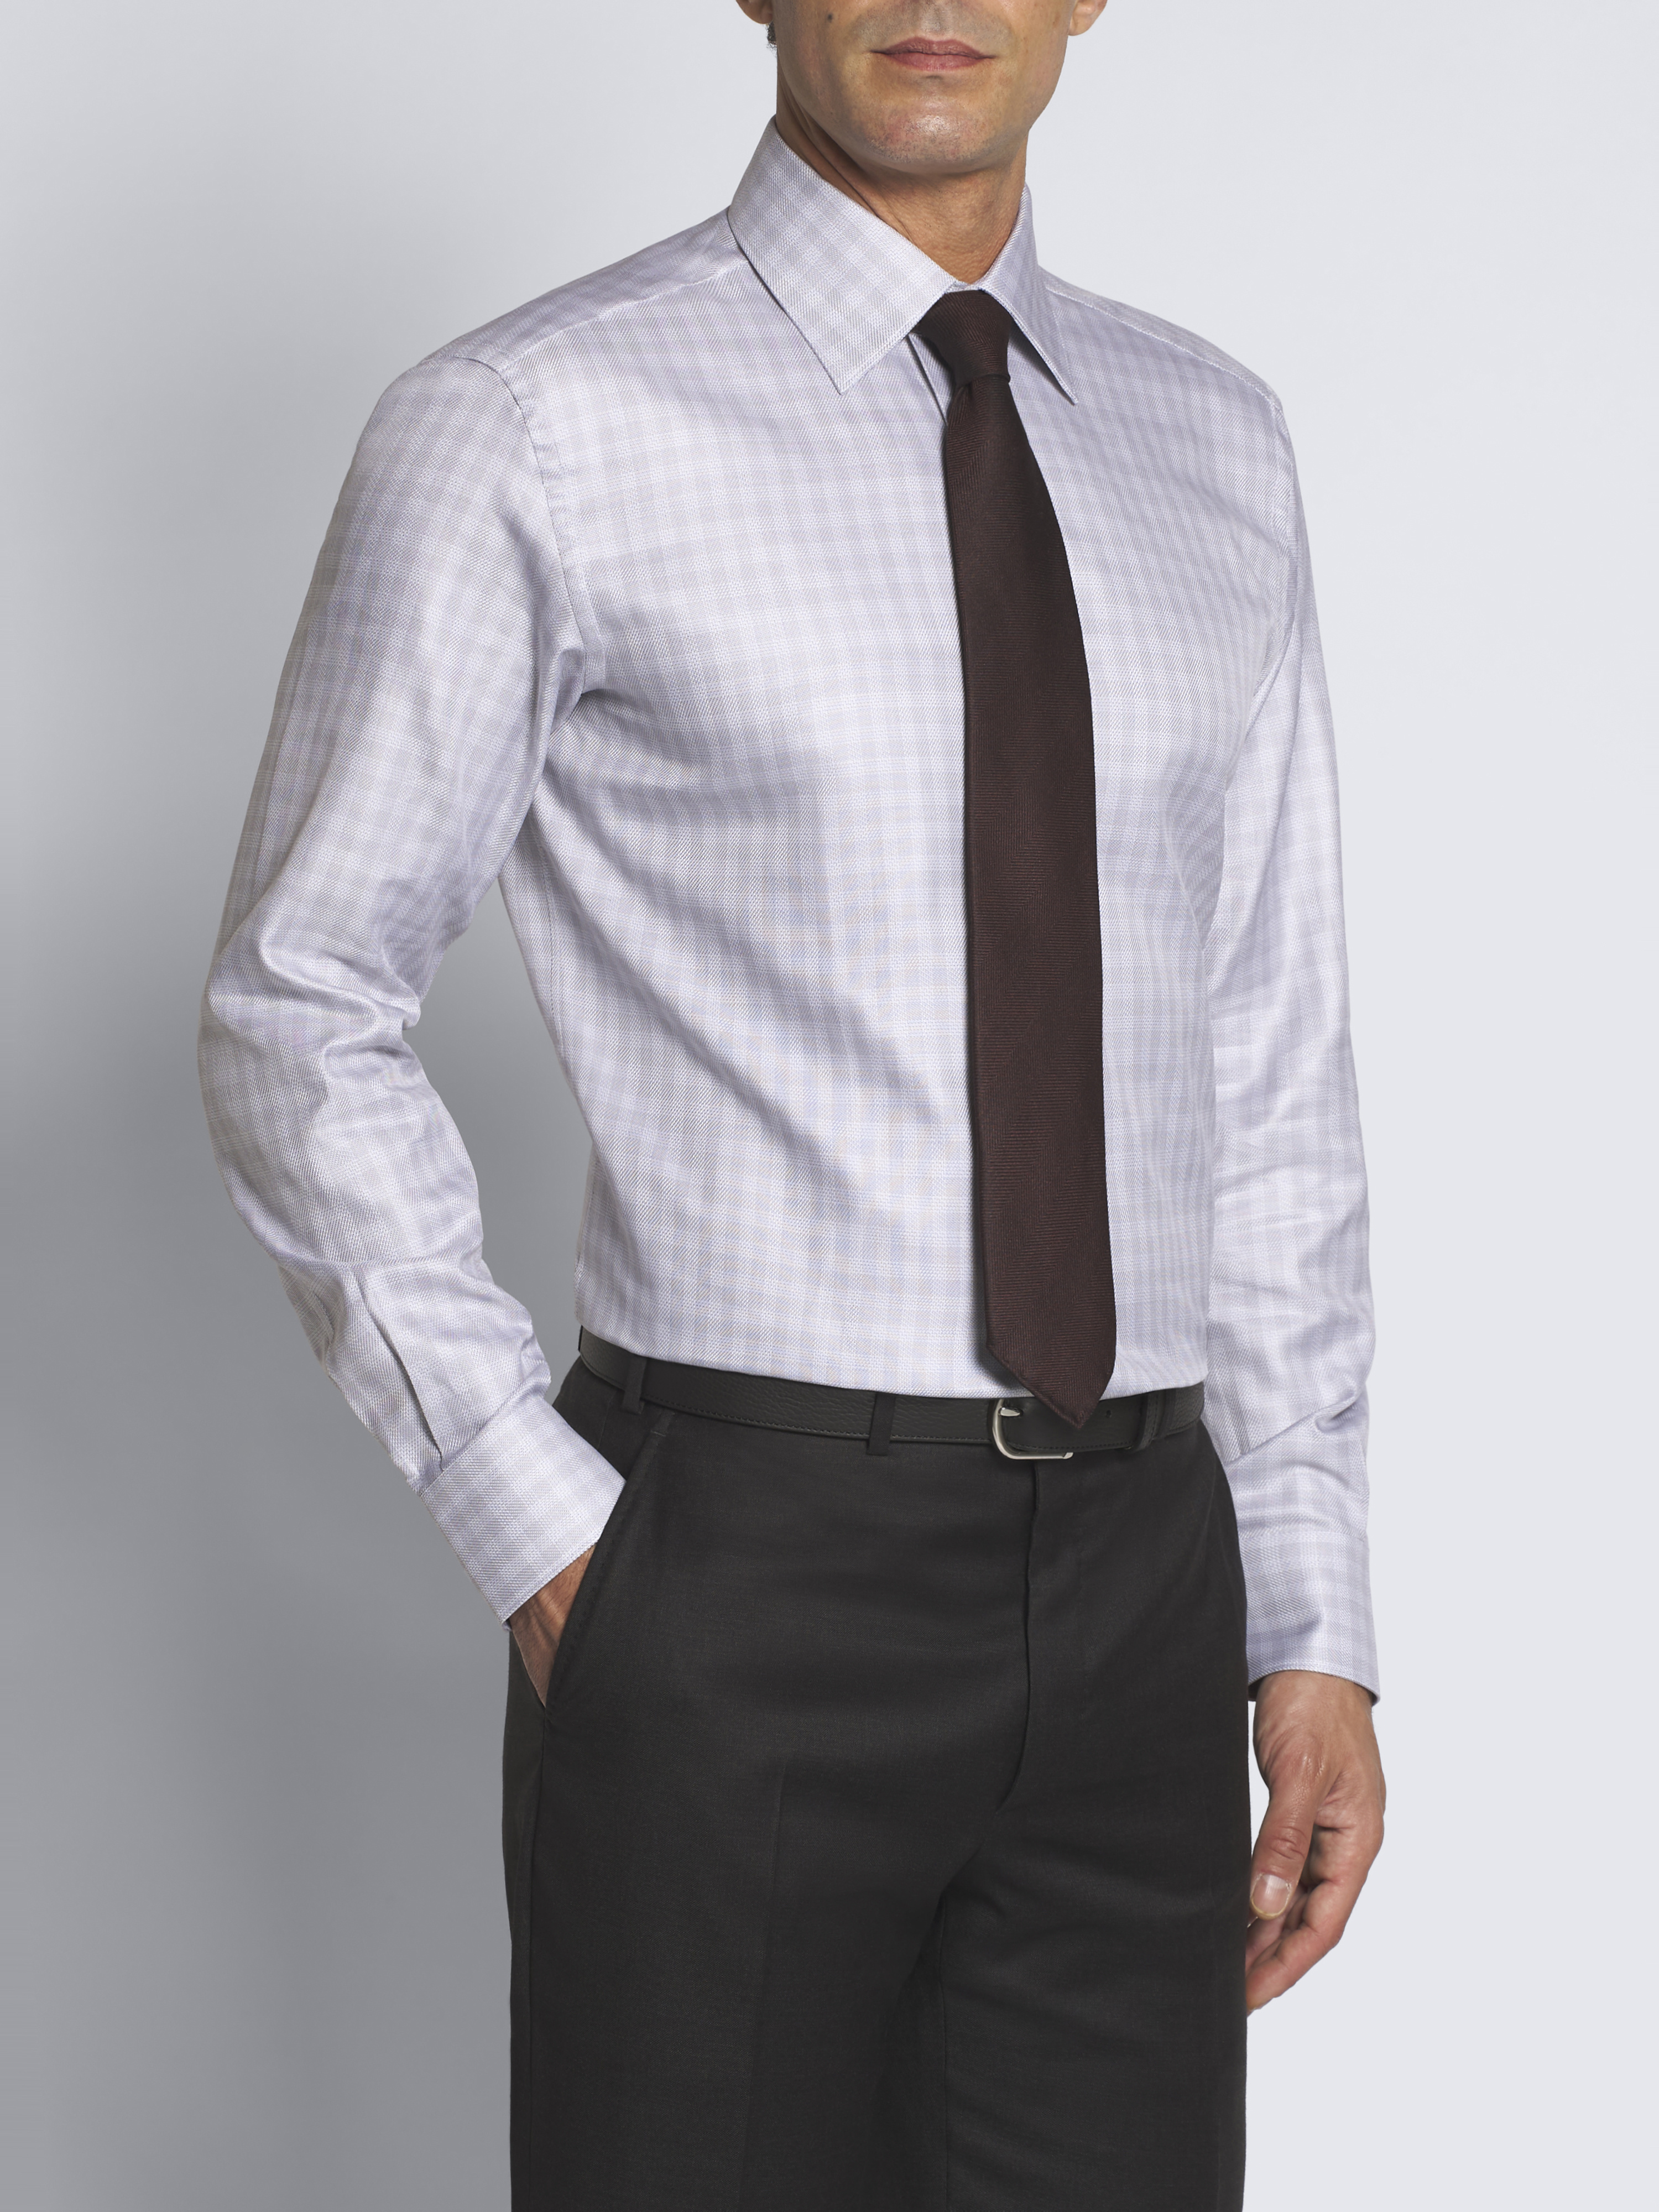 Grey and white cotton formal shirt | Brioni® US Official Store